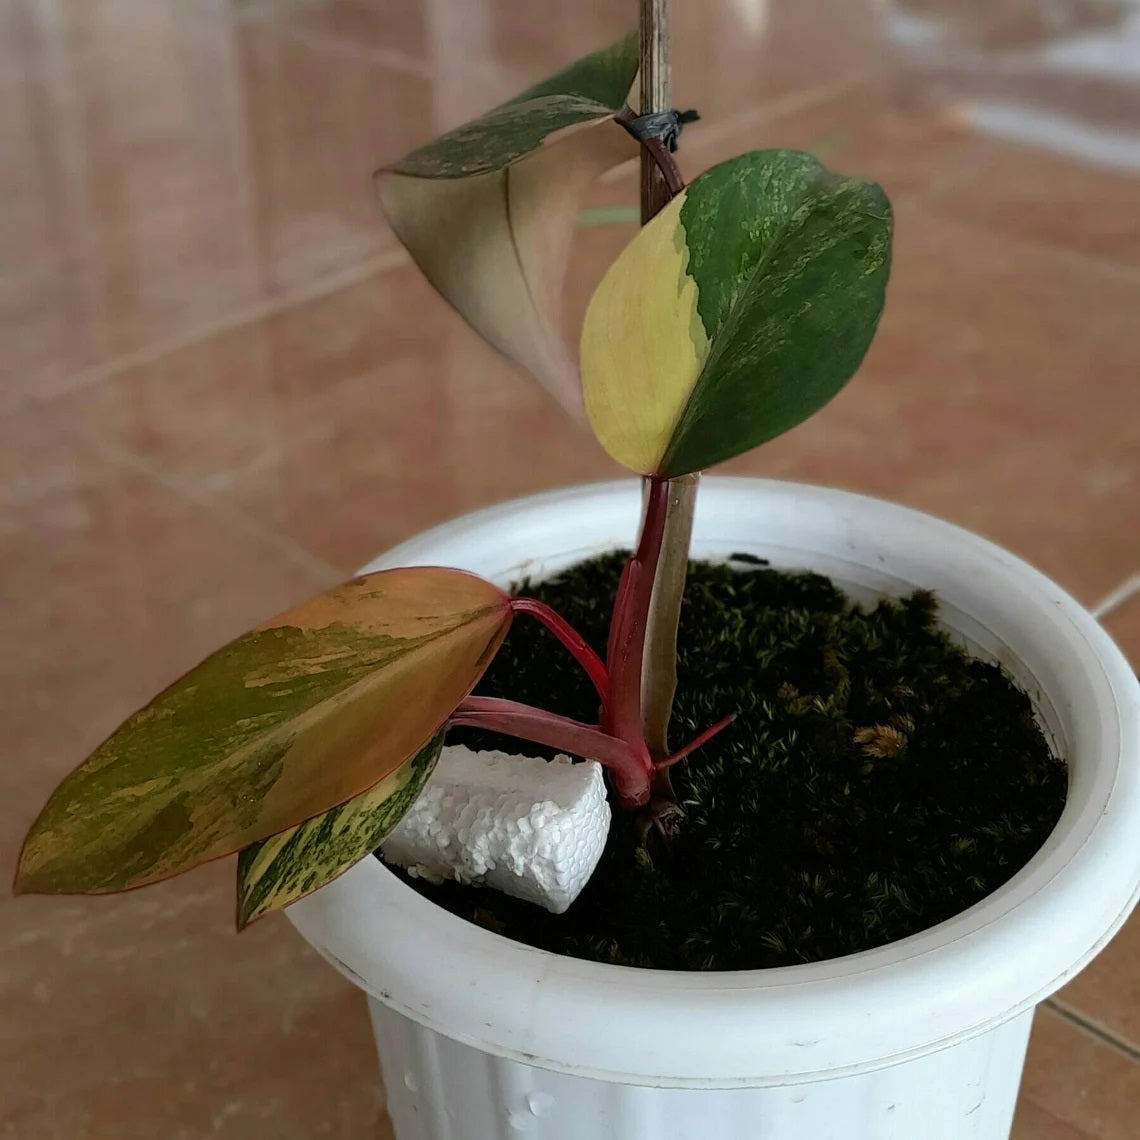 PHILODENDRON Strawberry Shake Varigated Plants